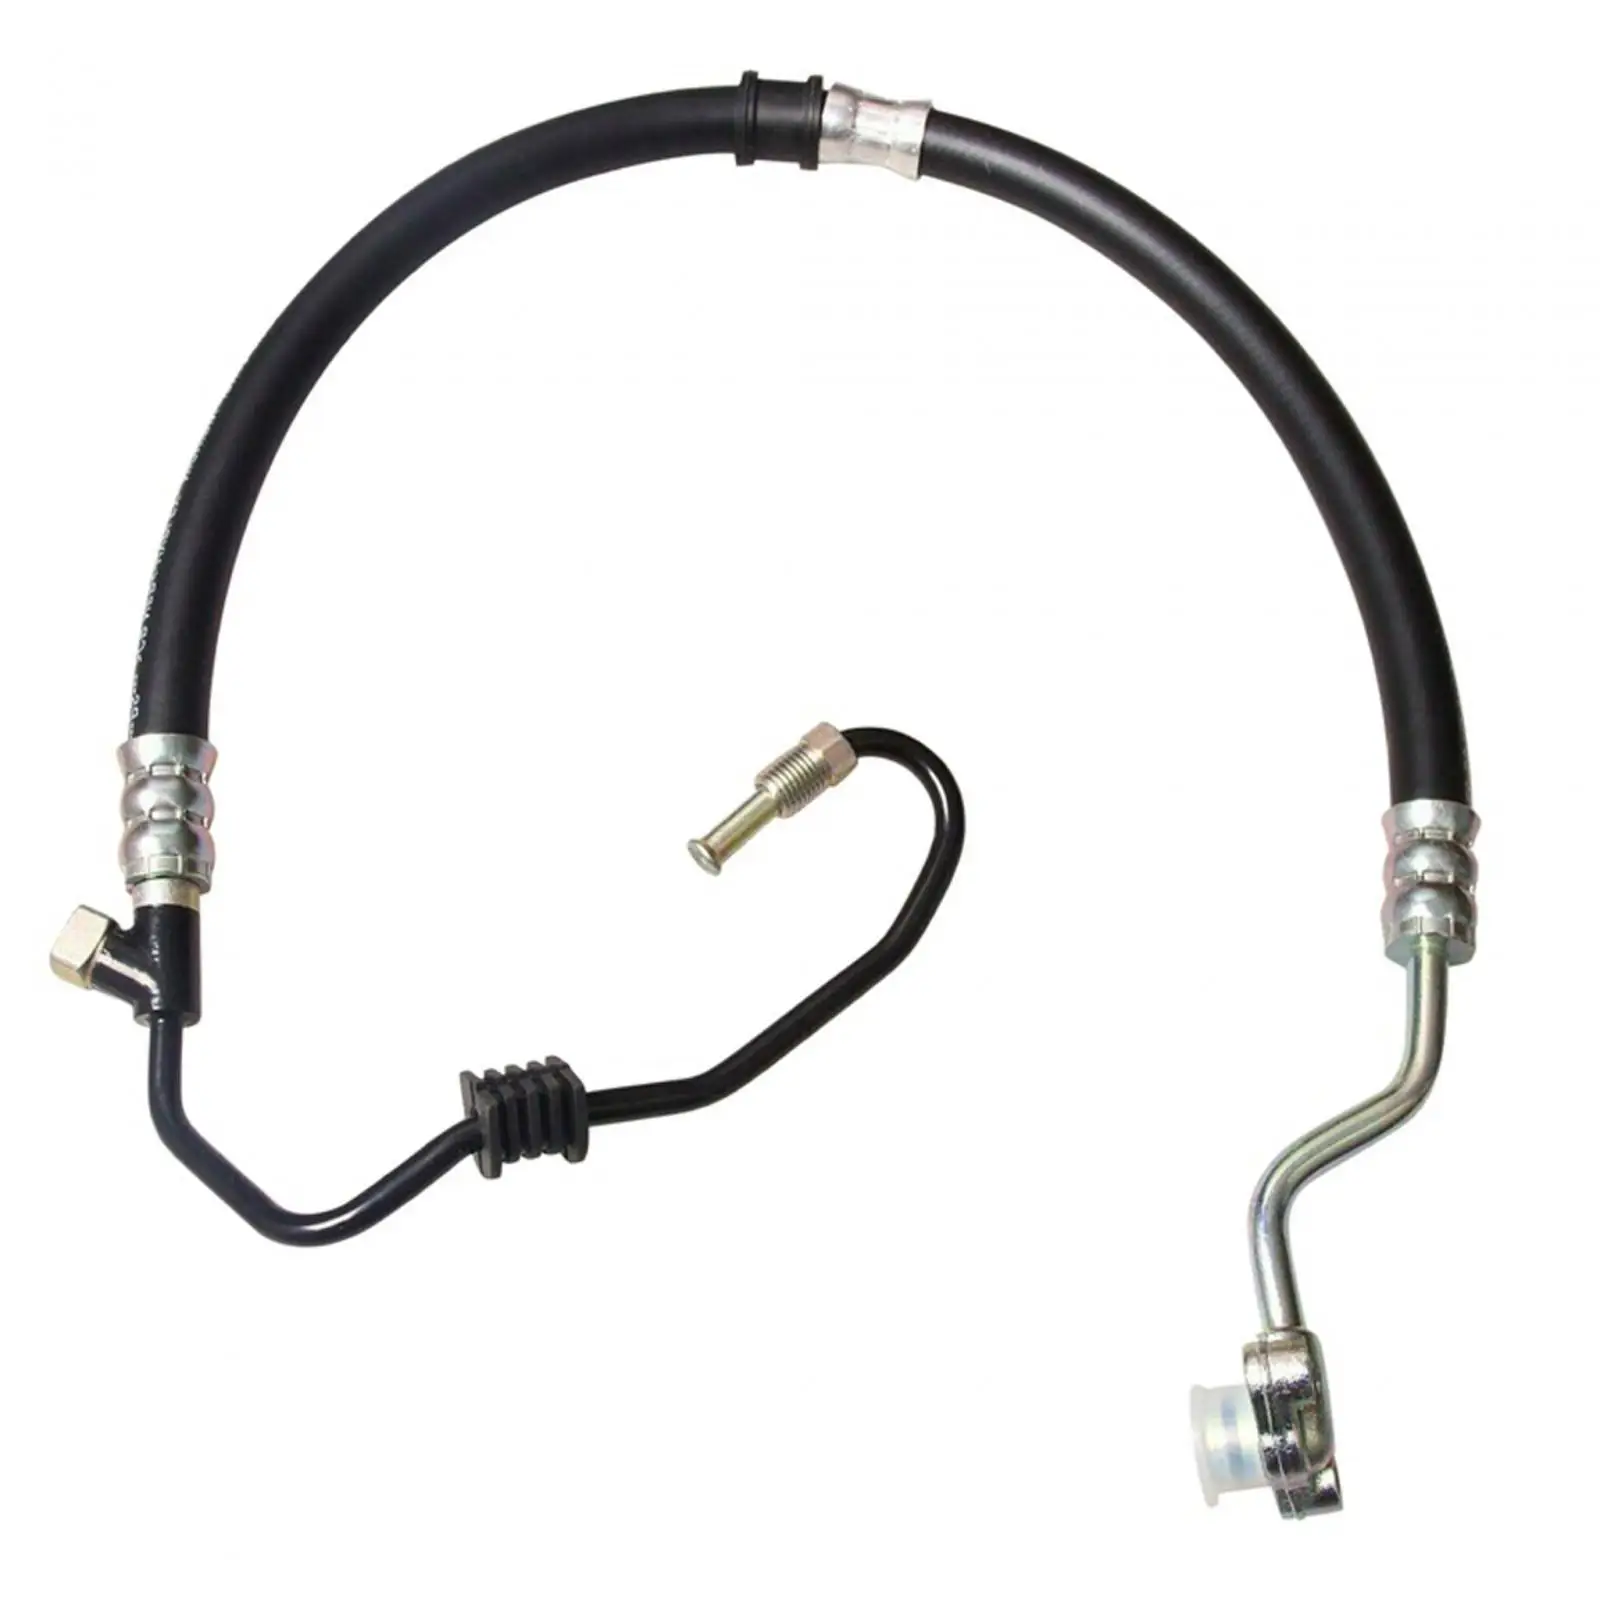 Power Steering Pressure Hose 53713-s84-a04 for Honda Accord 1998-2002